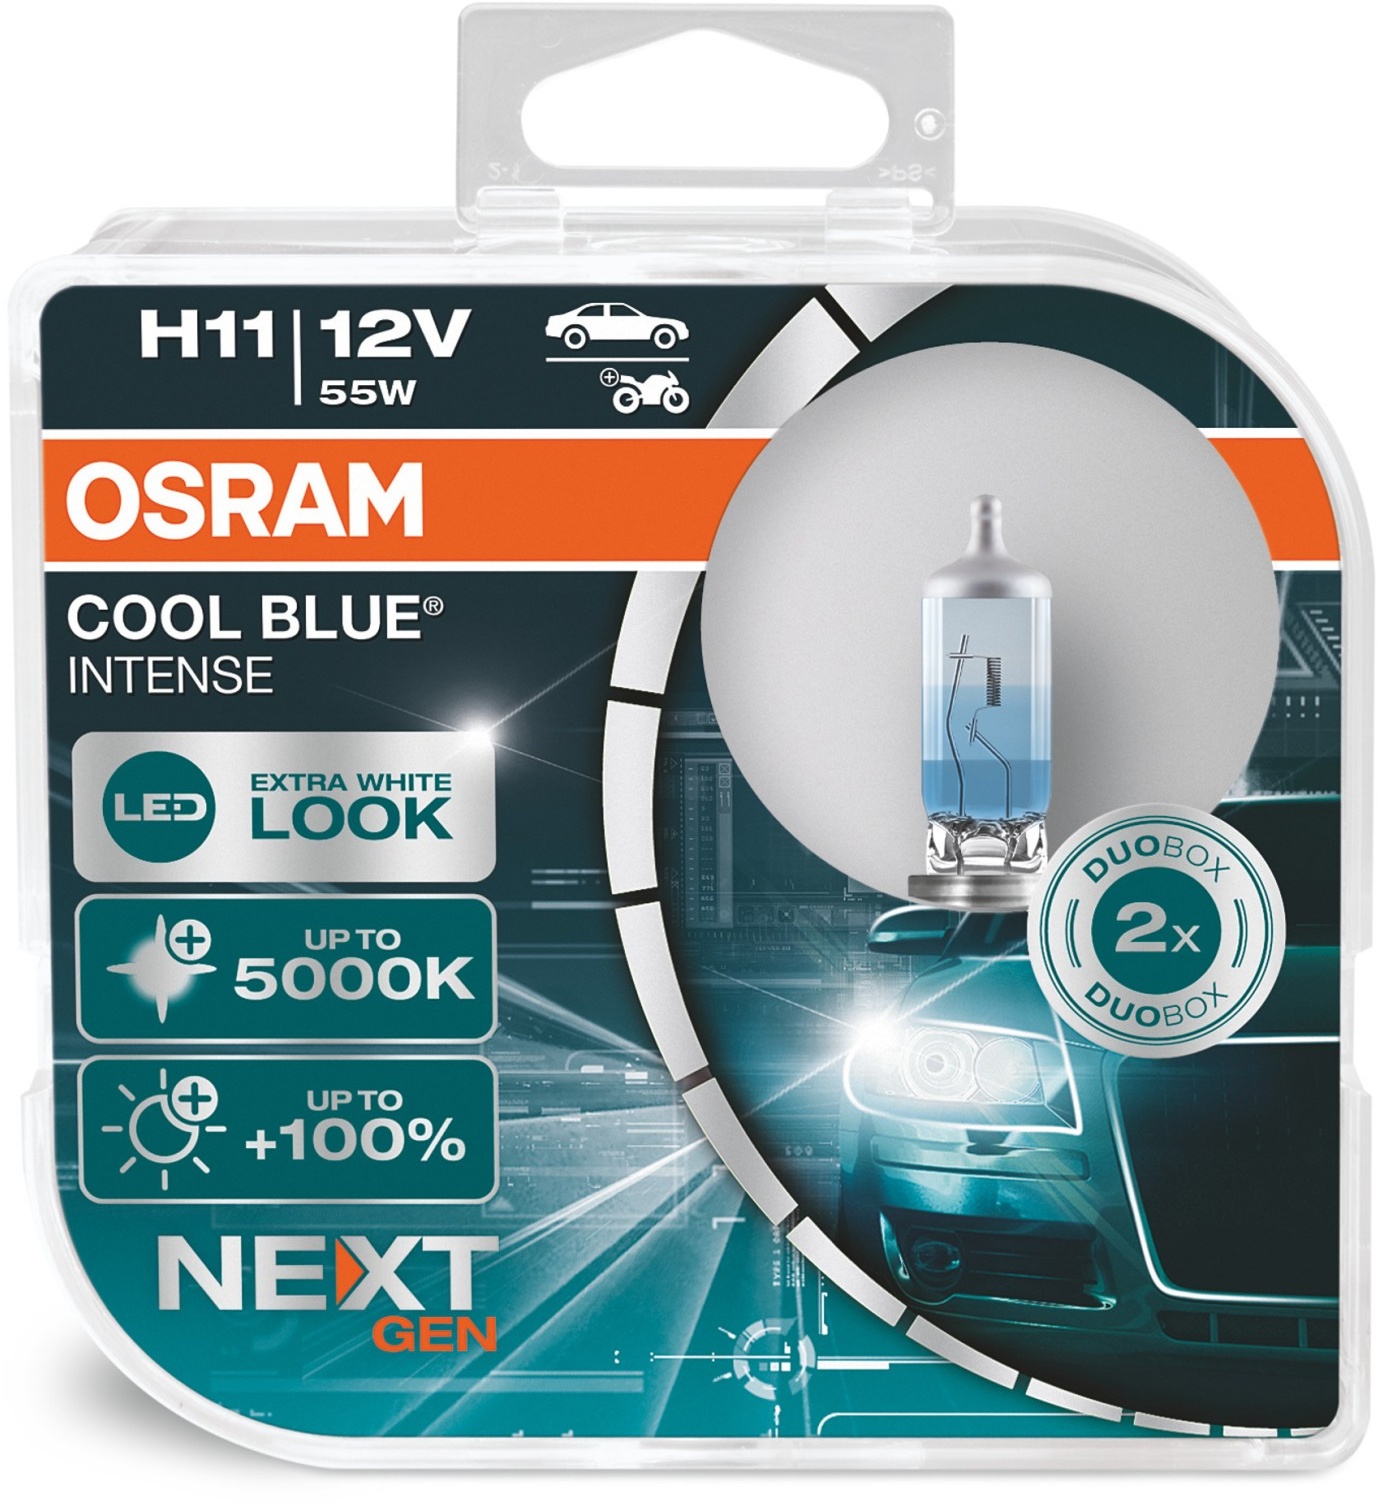 OSRAM COOL BLUE® INTENSE H11für MITSUBISHI ASX 1.8 DI-D PEUGEOT ION Electric LEXUS CT 200h LAND ROVER Discovery IV 2.7 TD 4x4 3.0 4WD TOYOTA Land